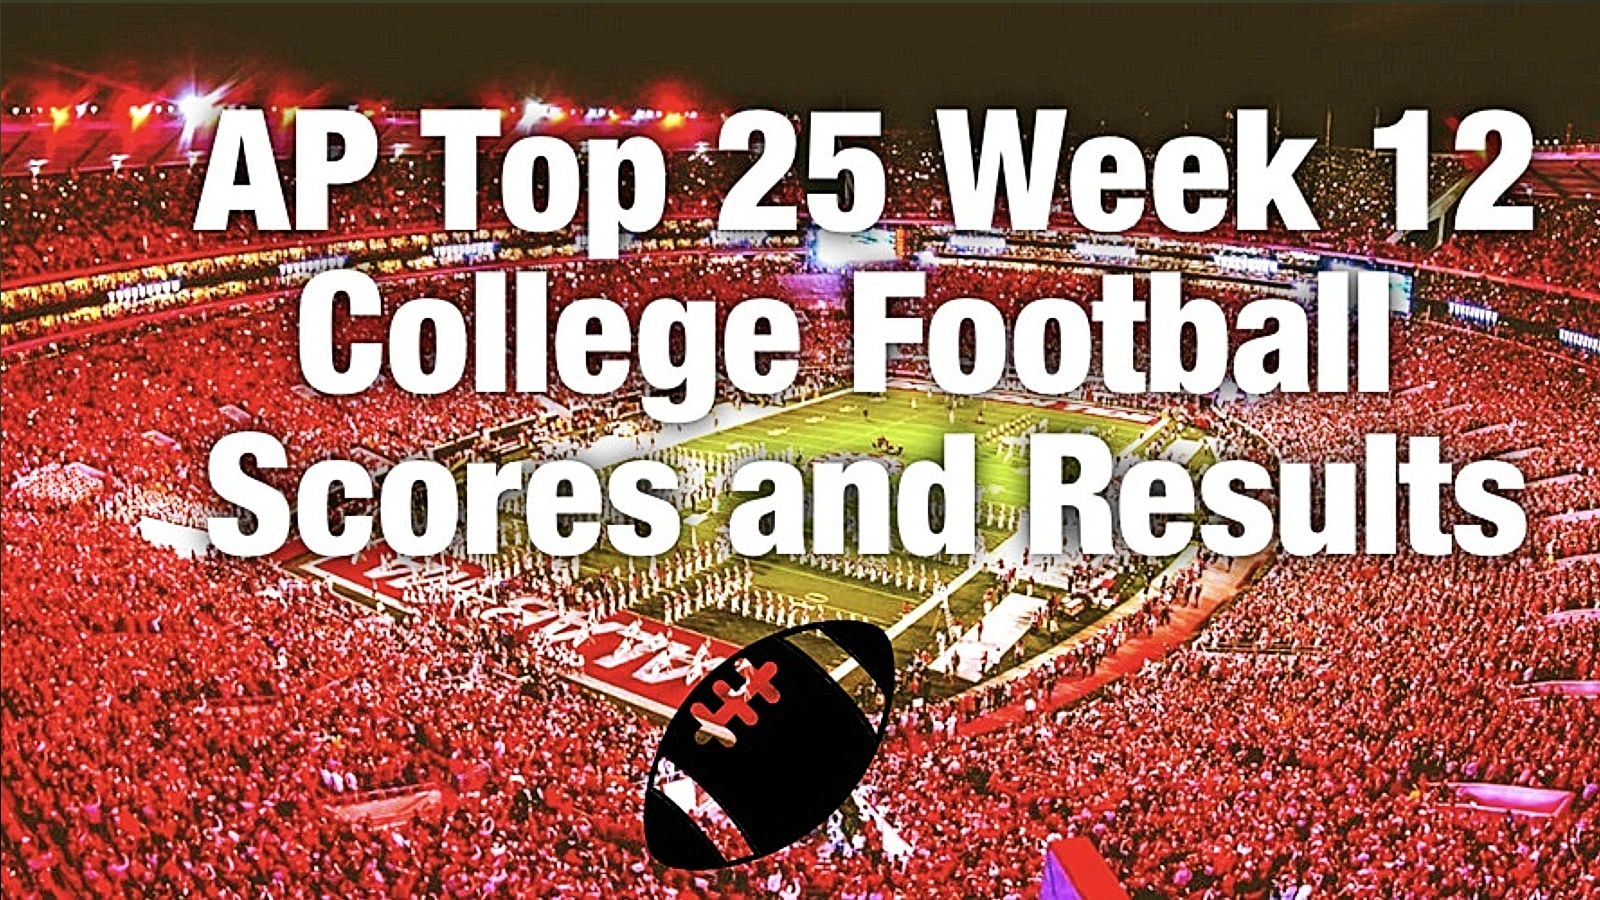 College Football Top 25 Week 12 scores and report. The winners and losers